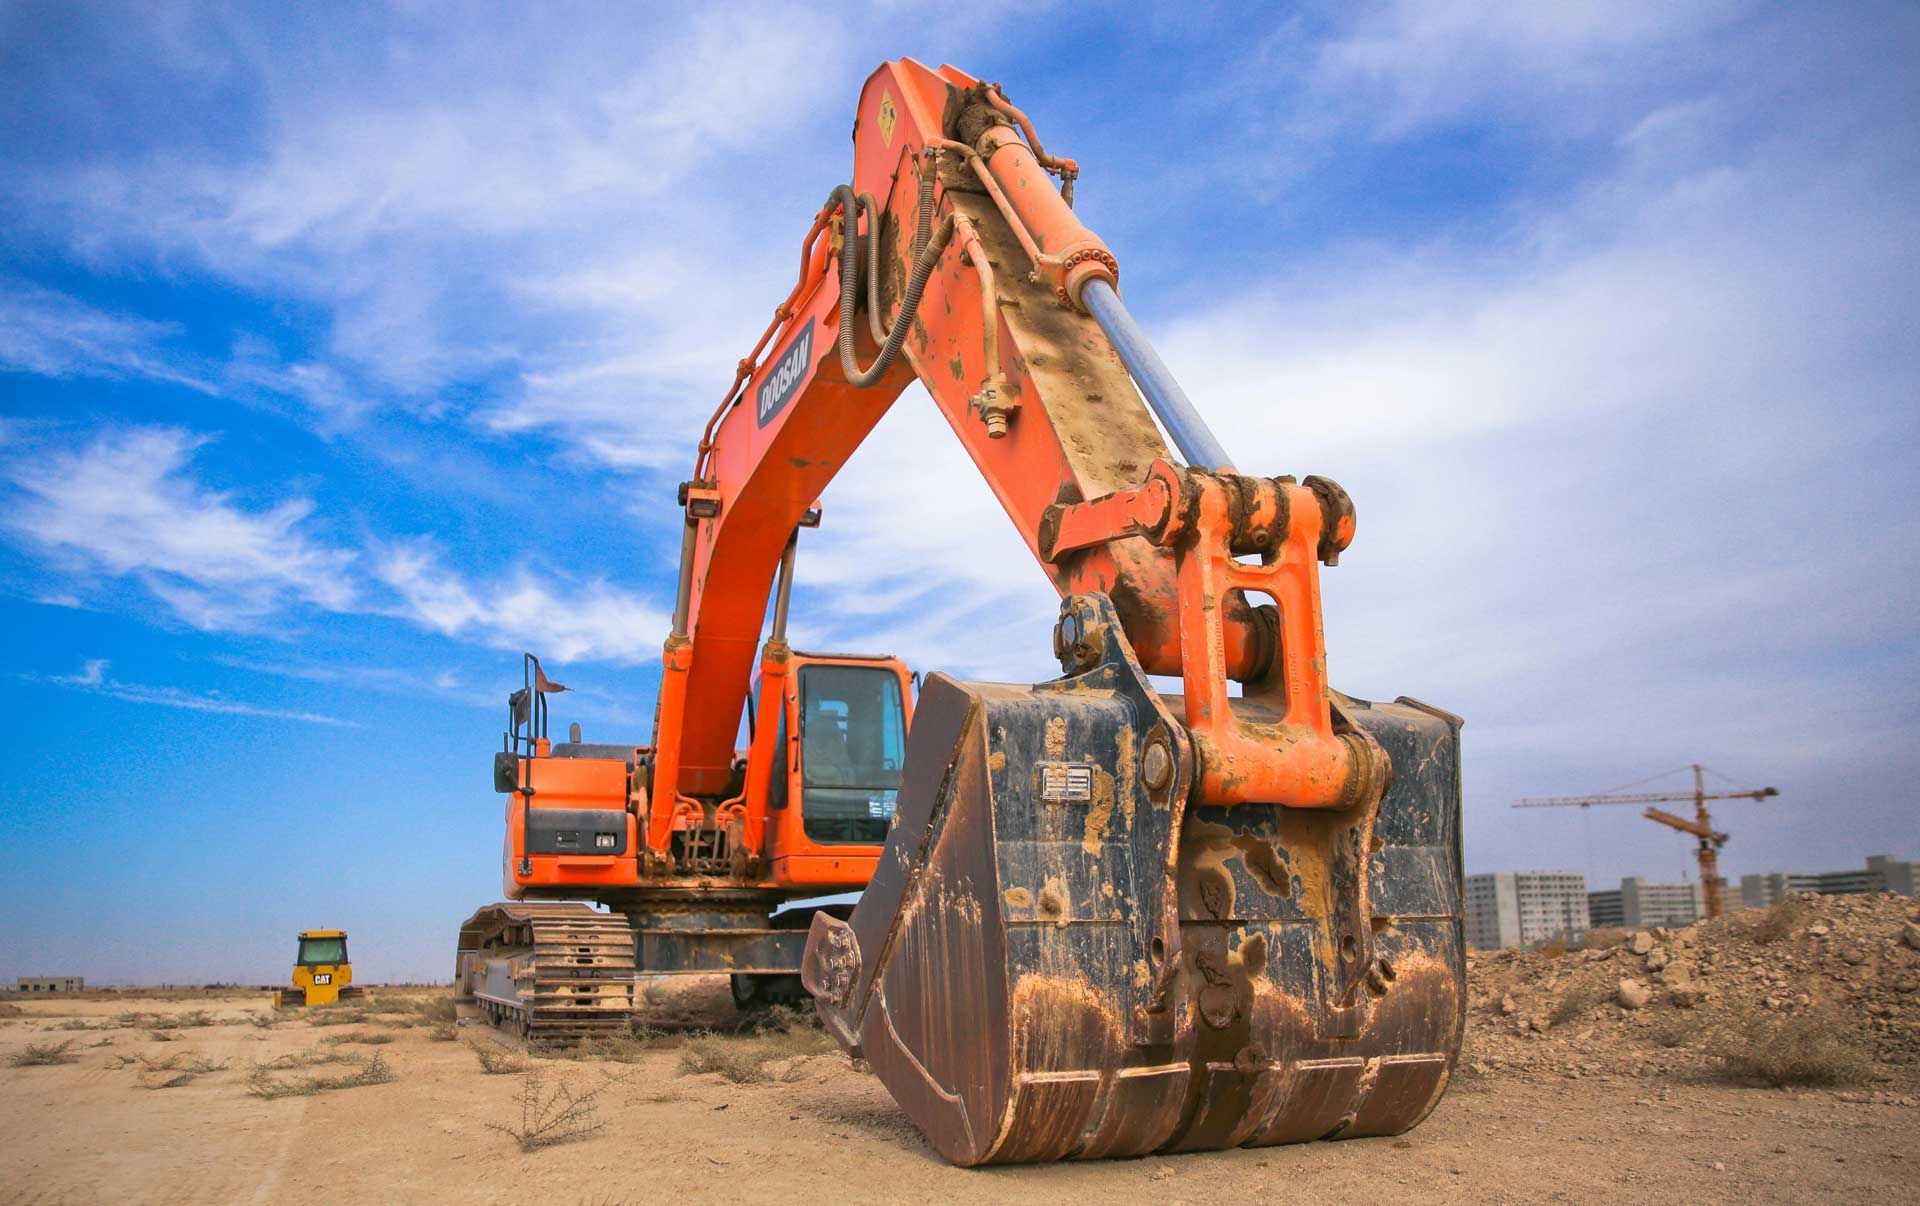 An Orange Construction Vehicle with A Bucket on The Side